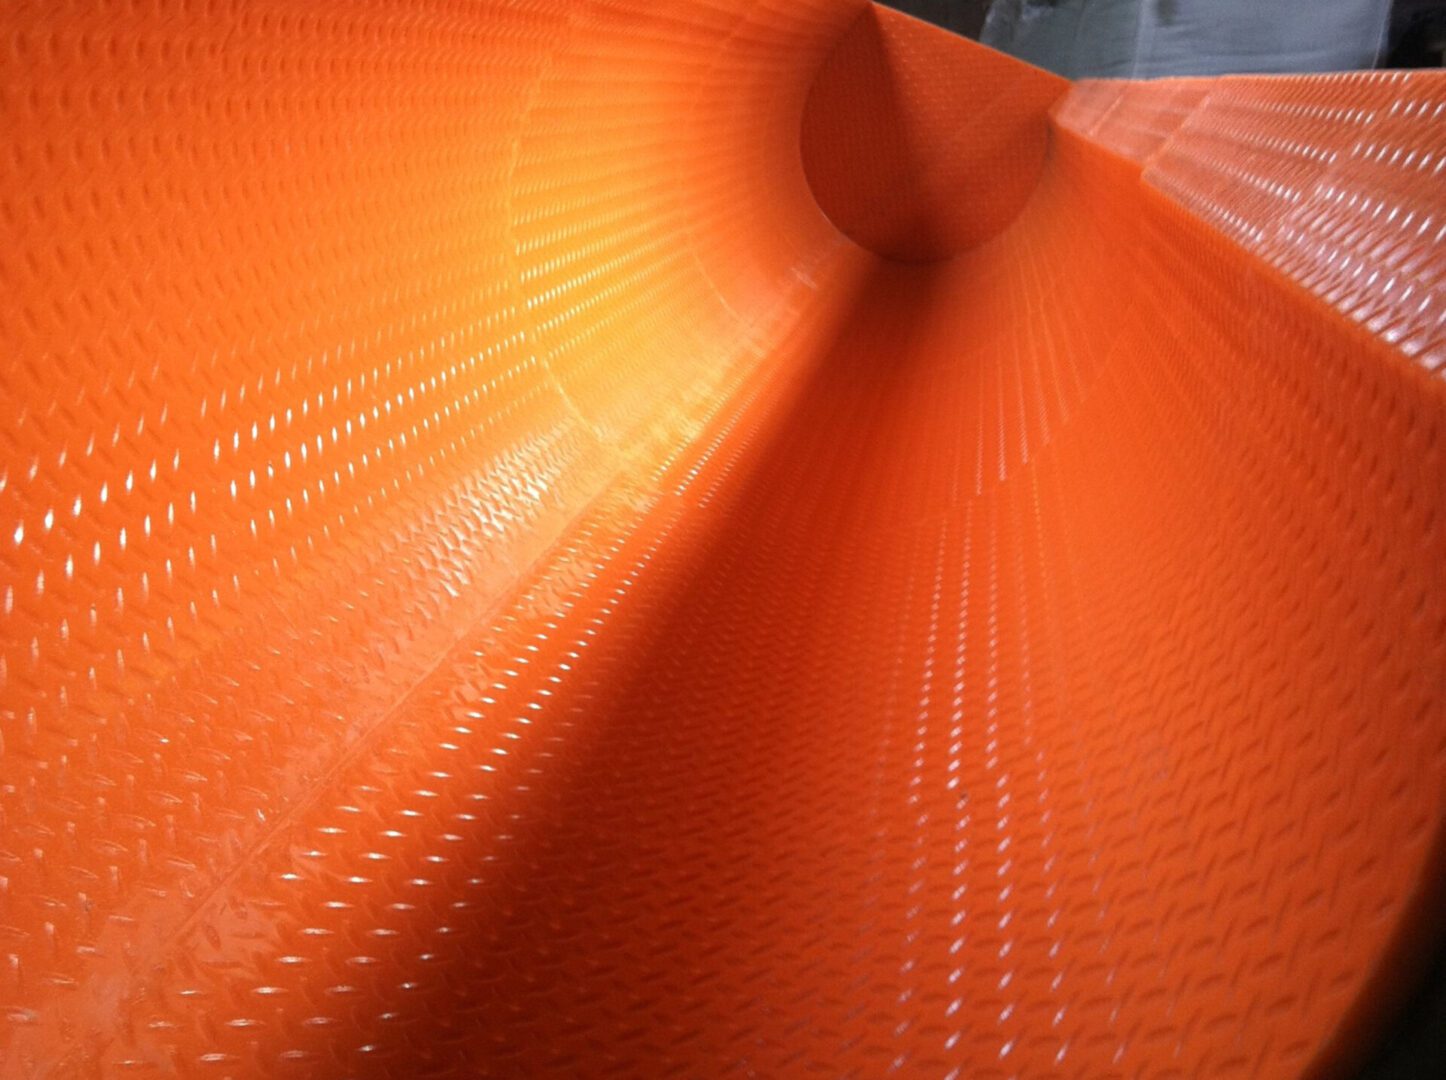 A close up of the orange surface of an industrial machine.